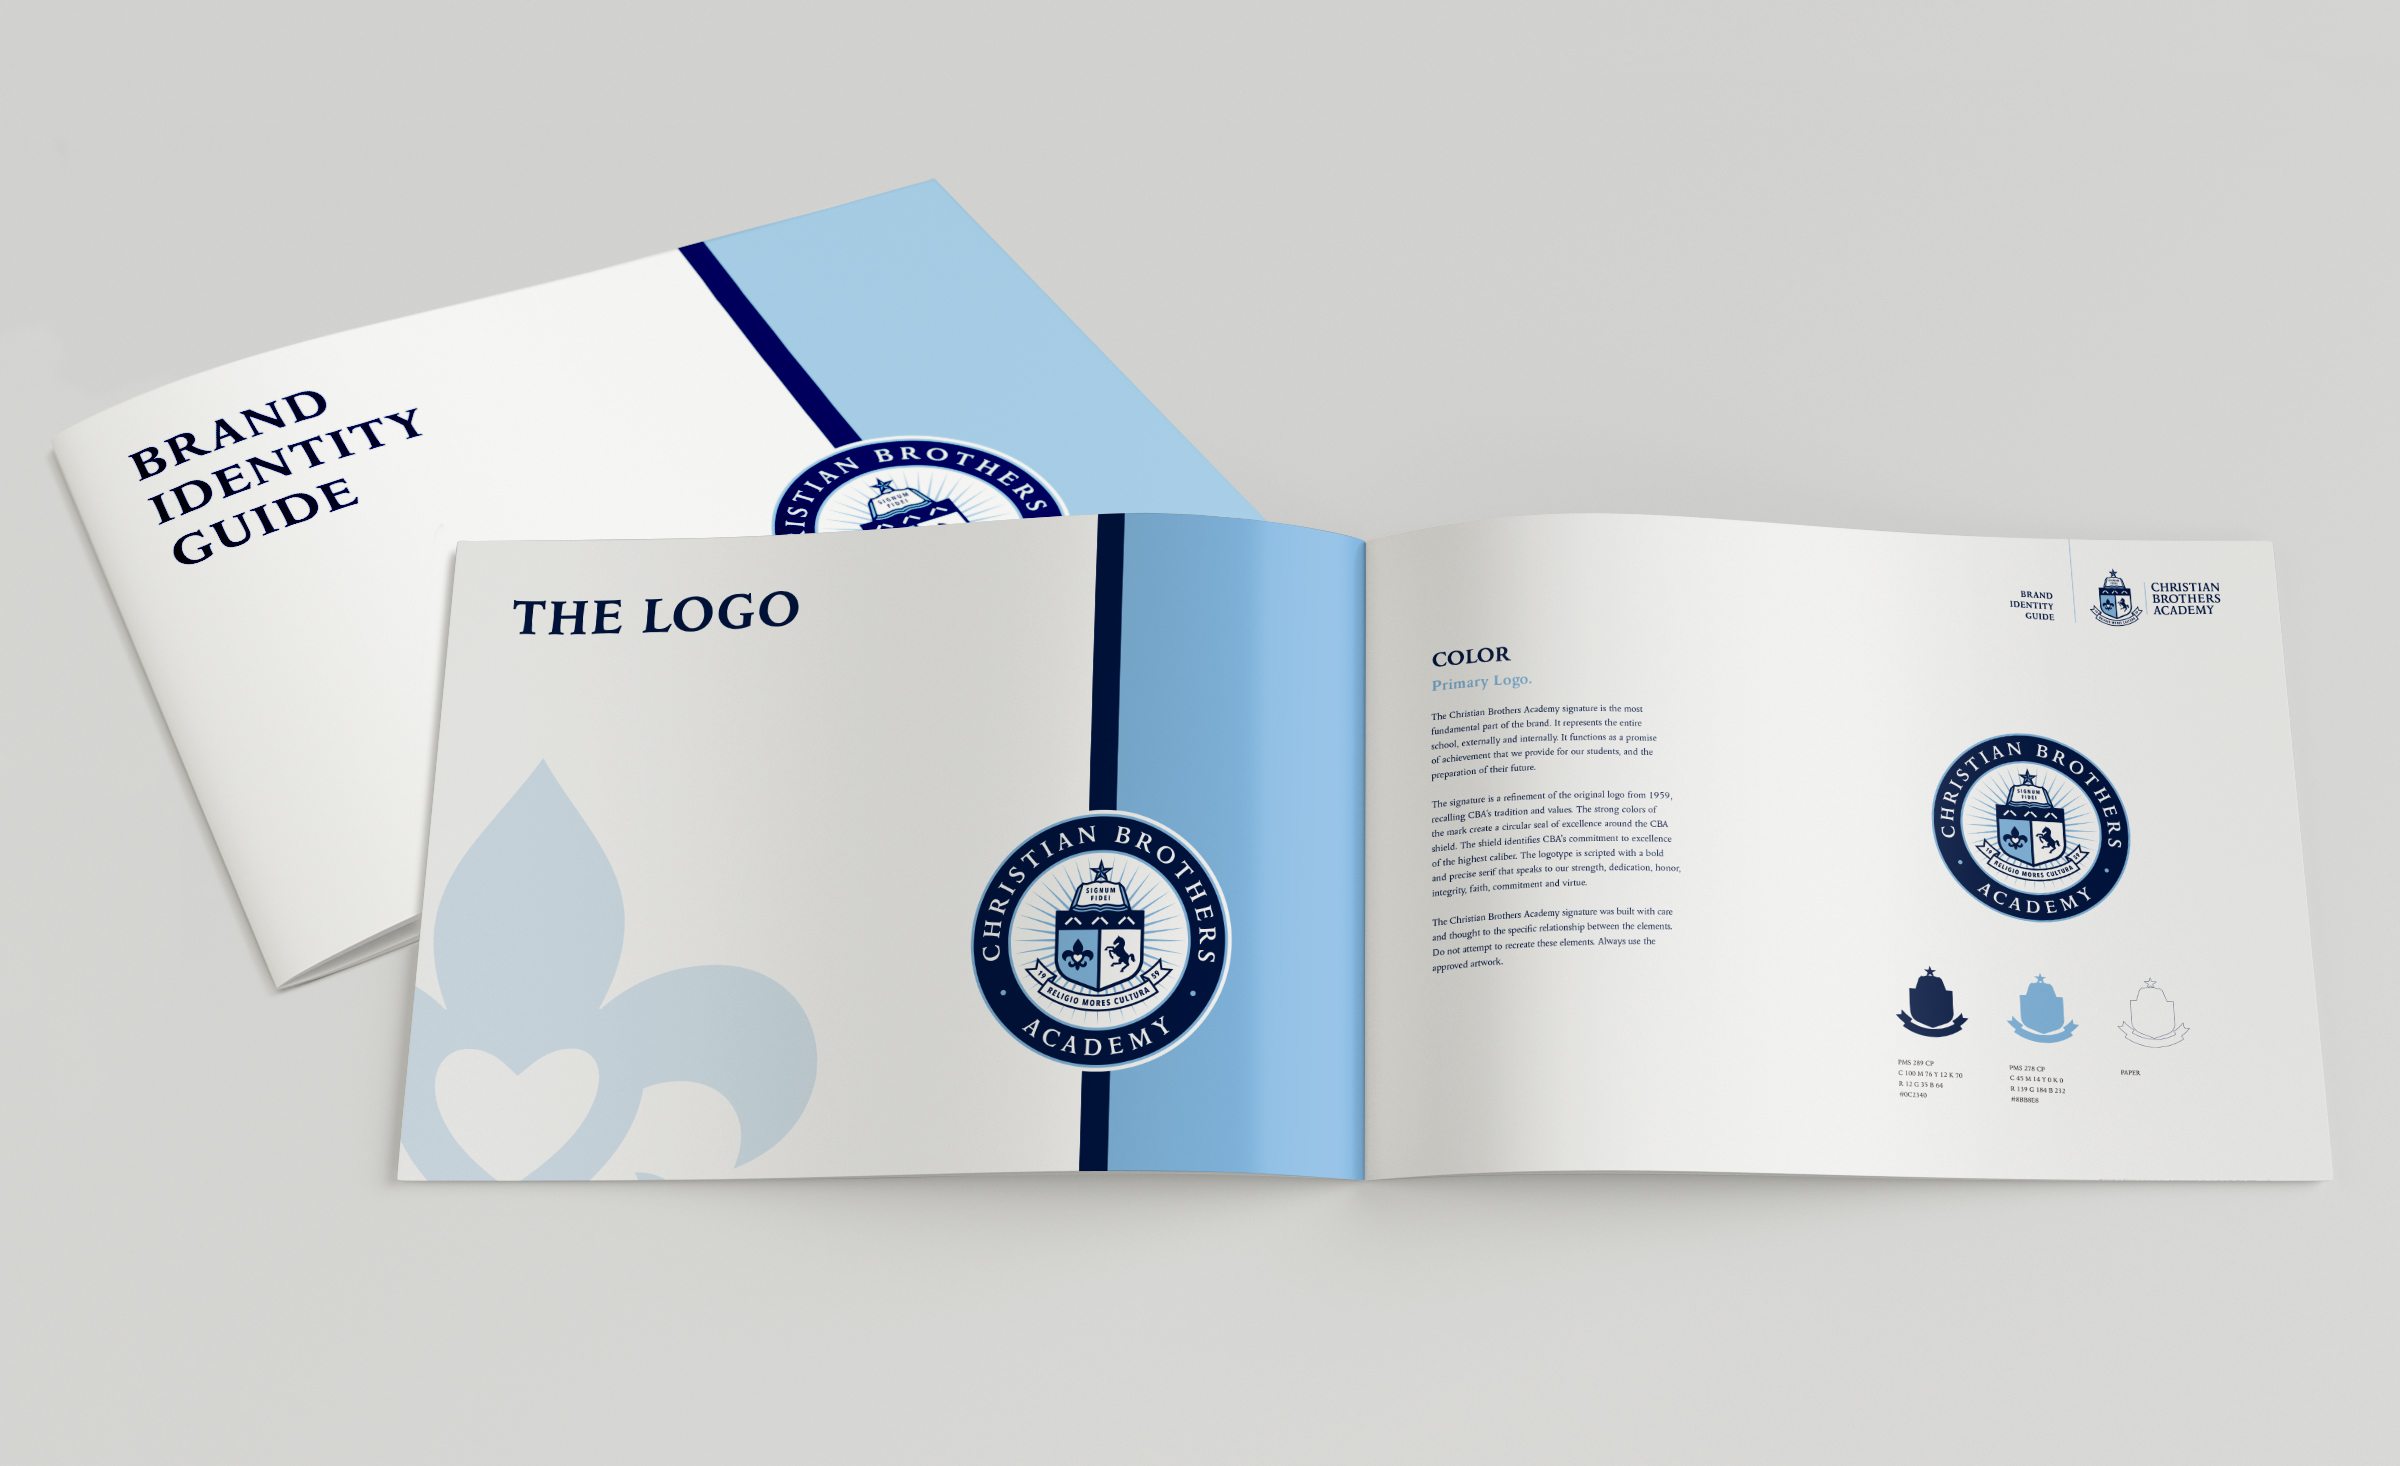 Brand identity guide for Christian Brothers Academy.